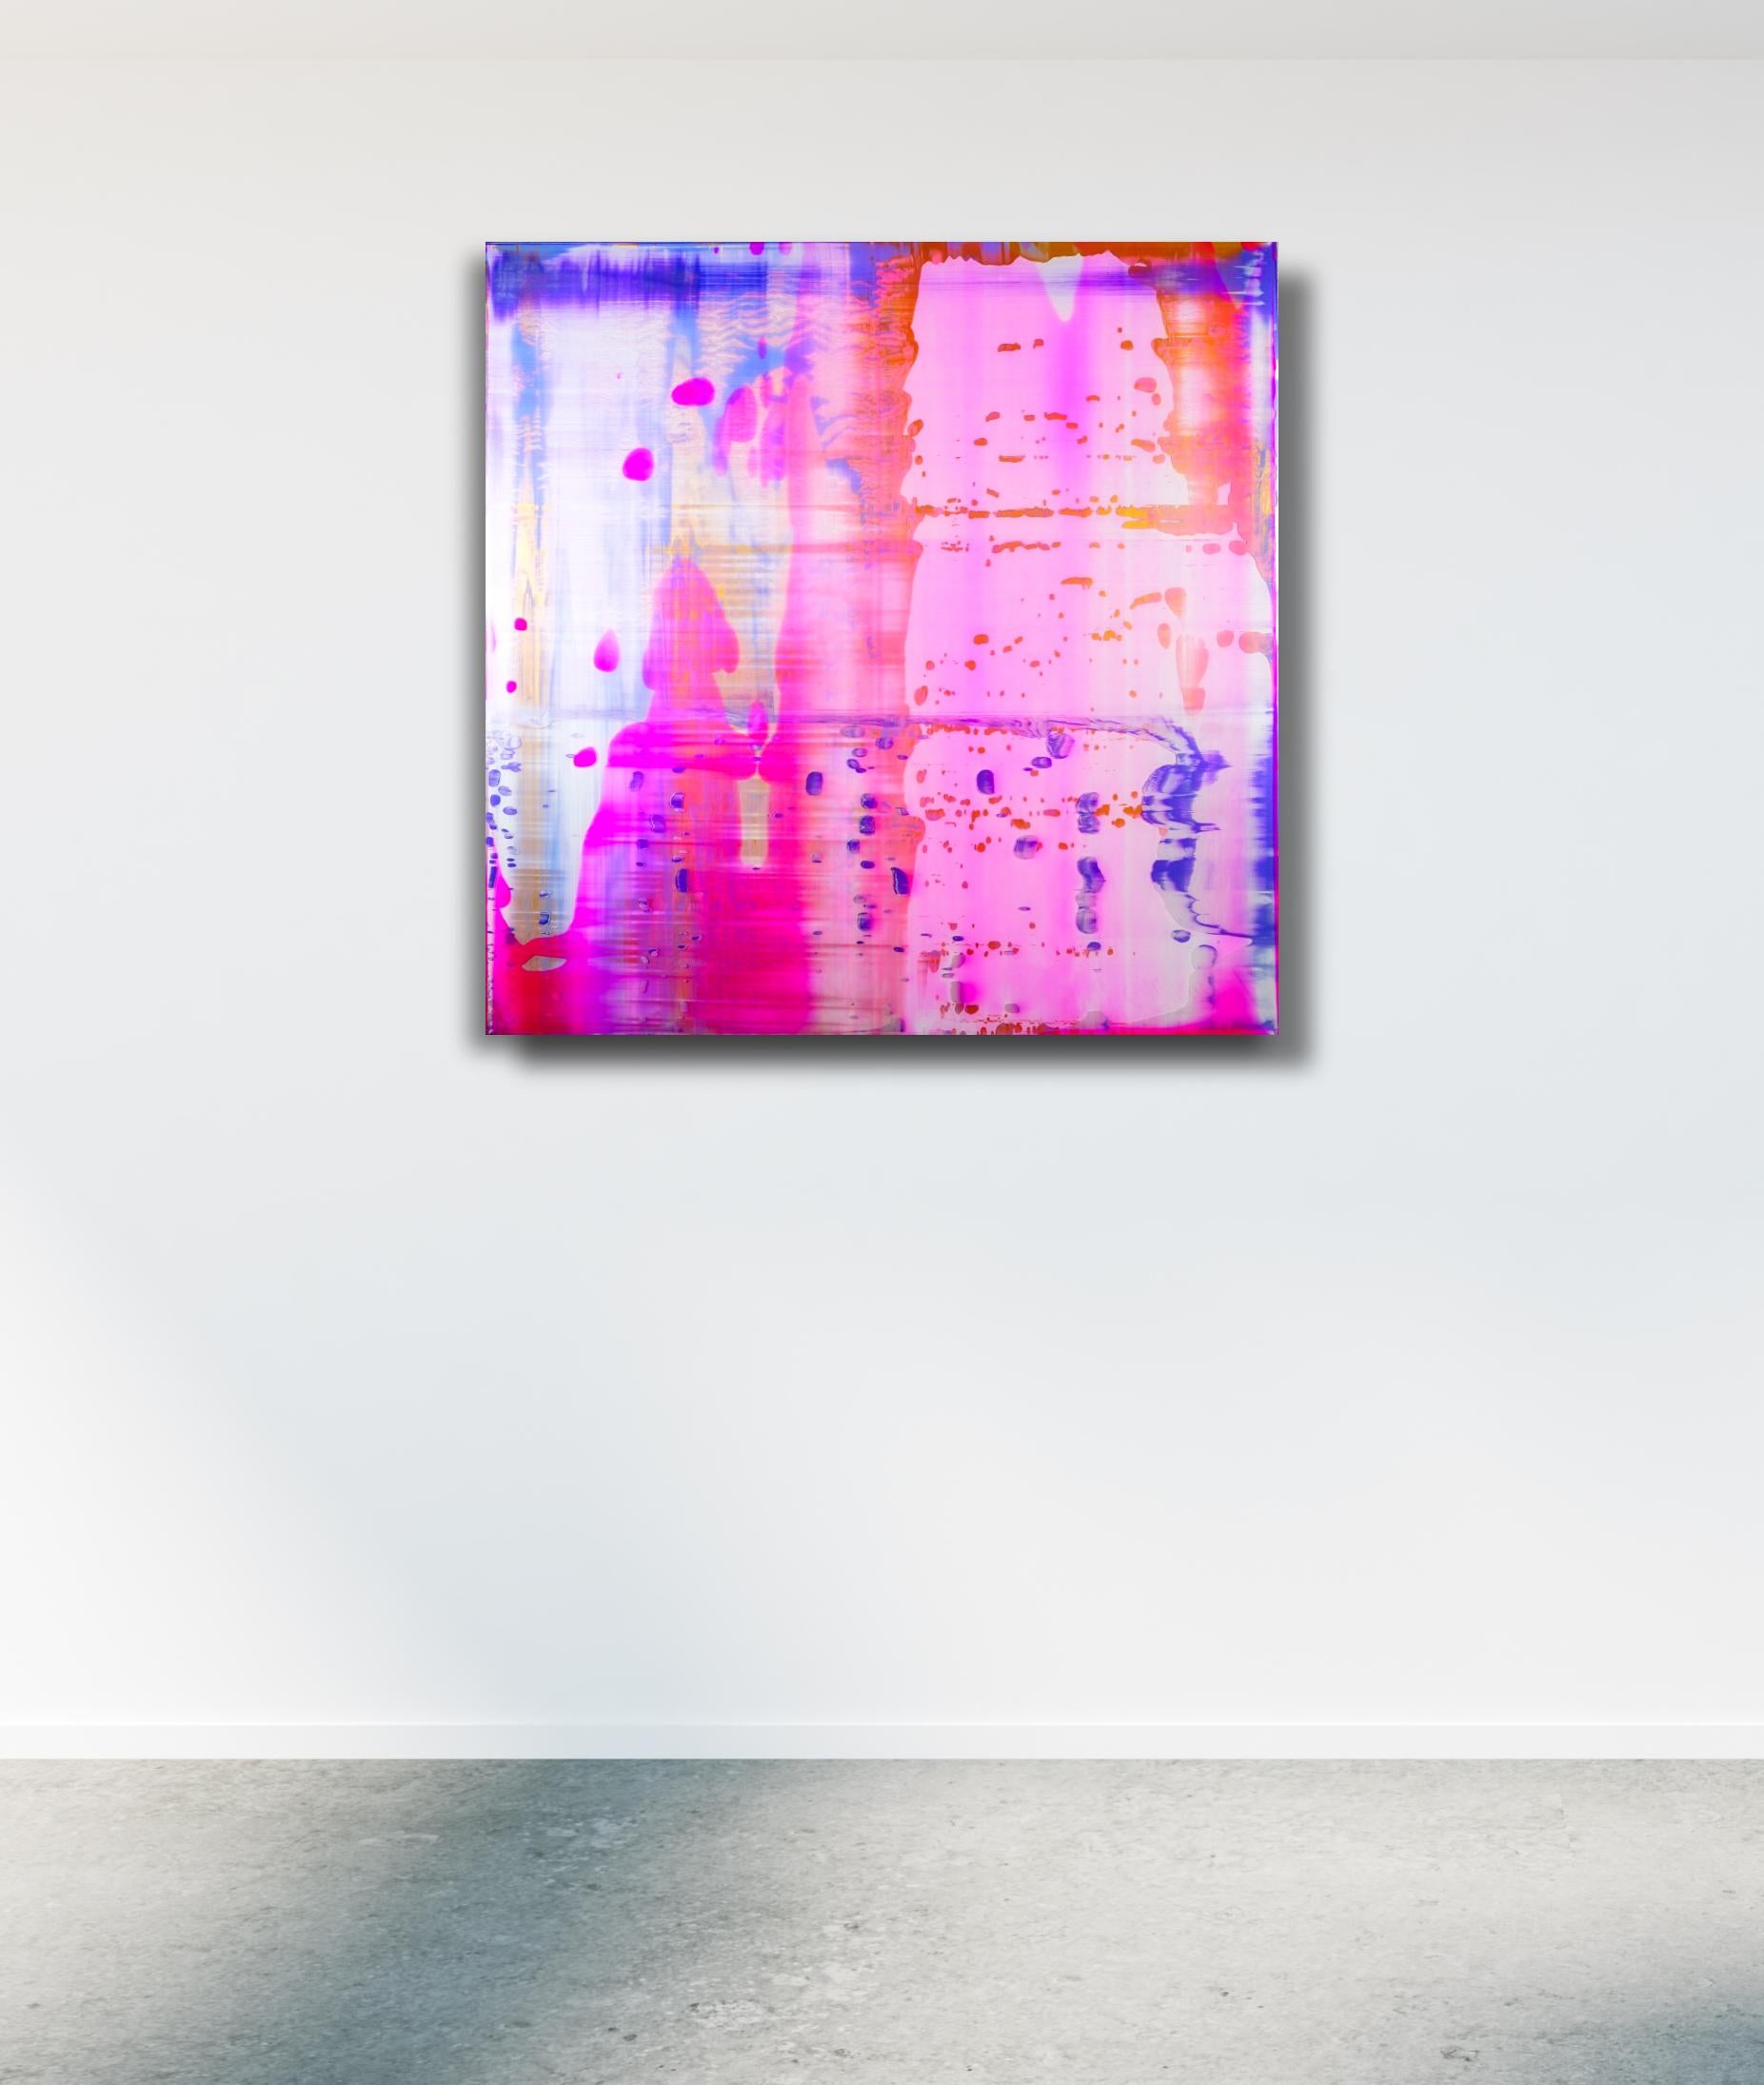 Pink Lush (Abstract Painting)

Painting / acrylics, epoxy resin, phosphorescence on wood  - Unframed

This artwork is exclusive to IdeelArt. 

Danny Giesbers is a Dutch, autodidact abstract painter who incorporates 21st century developments into his